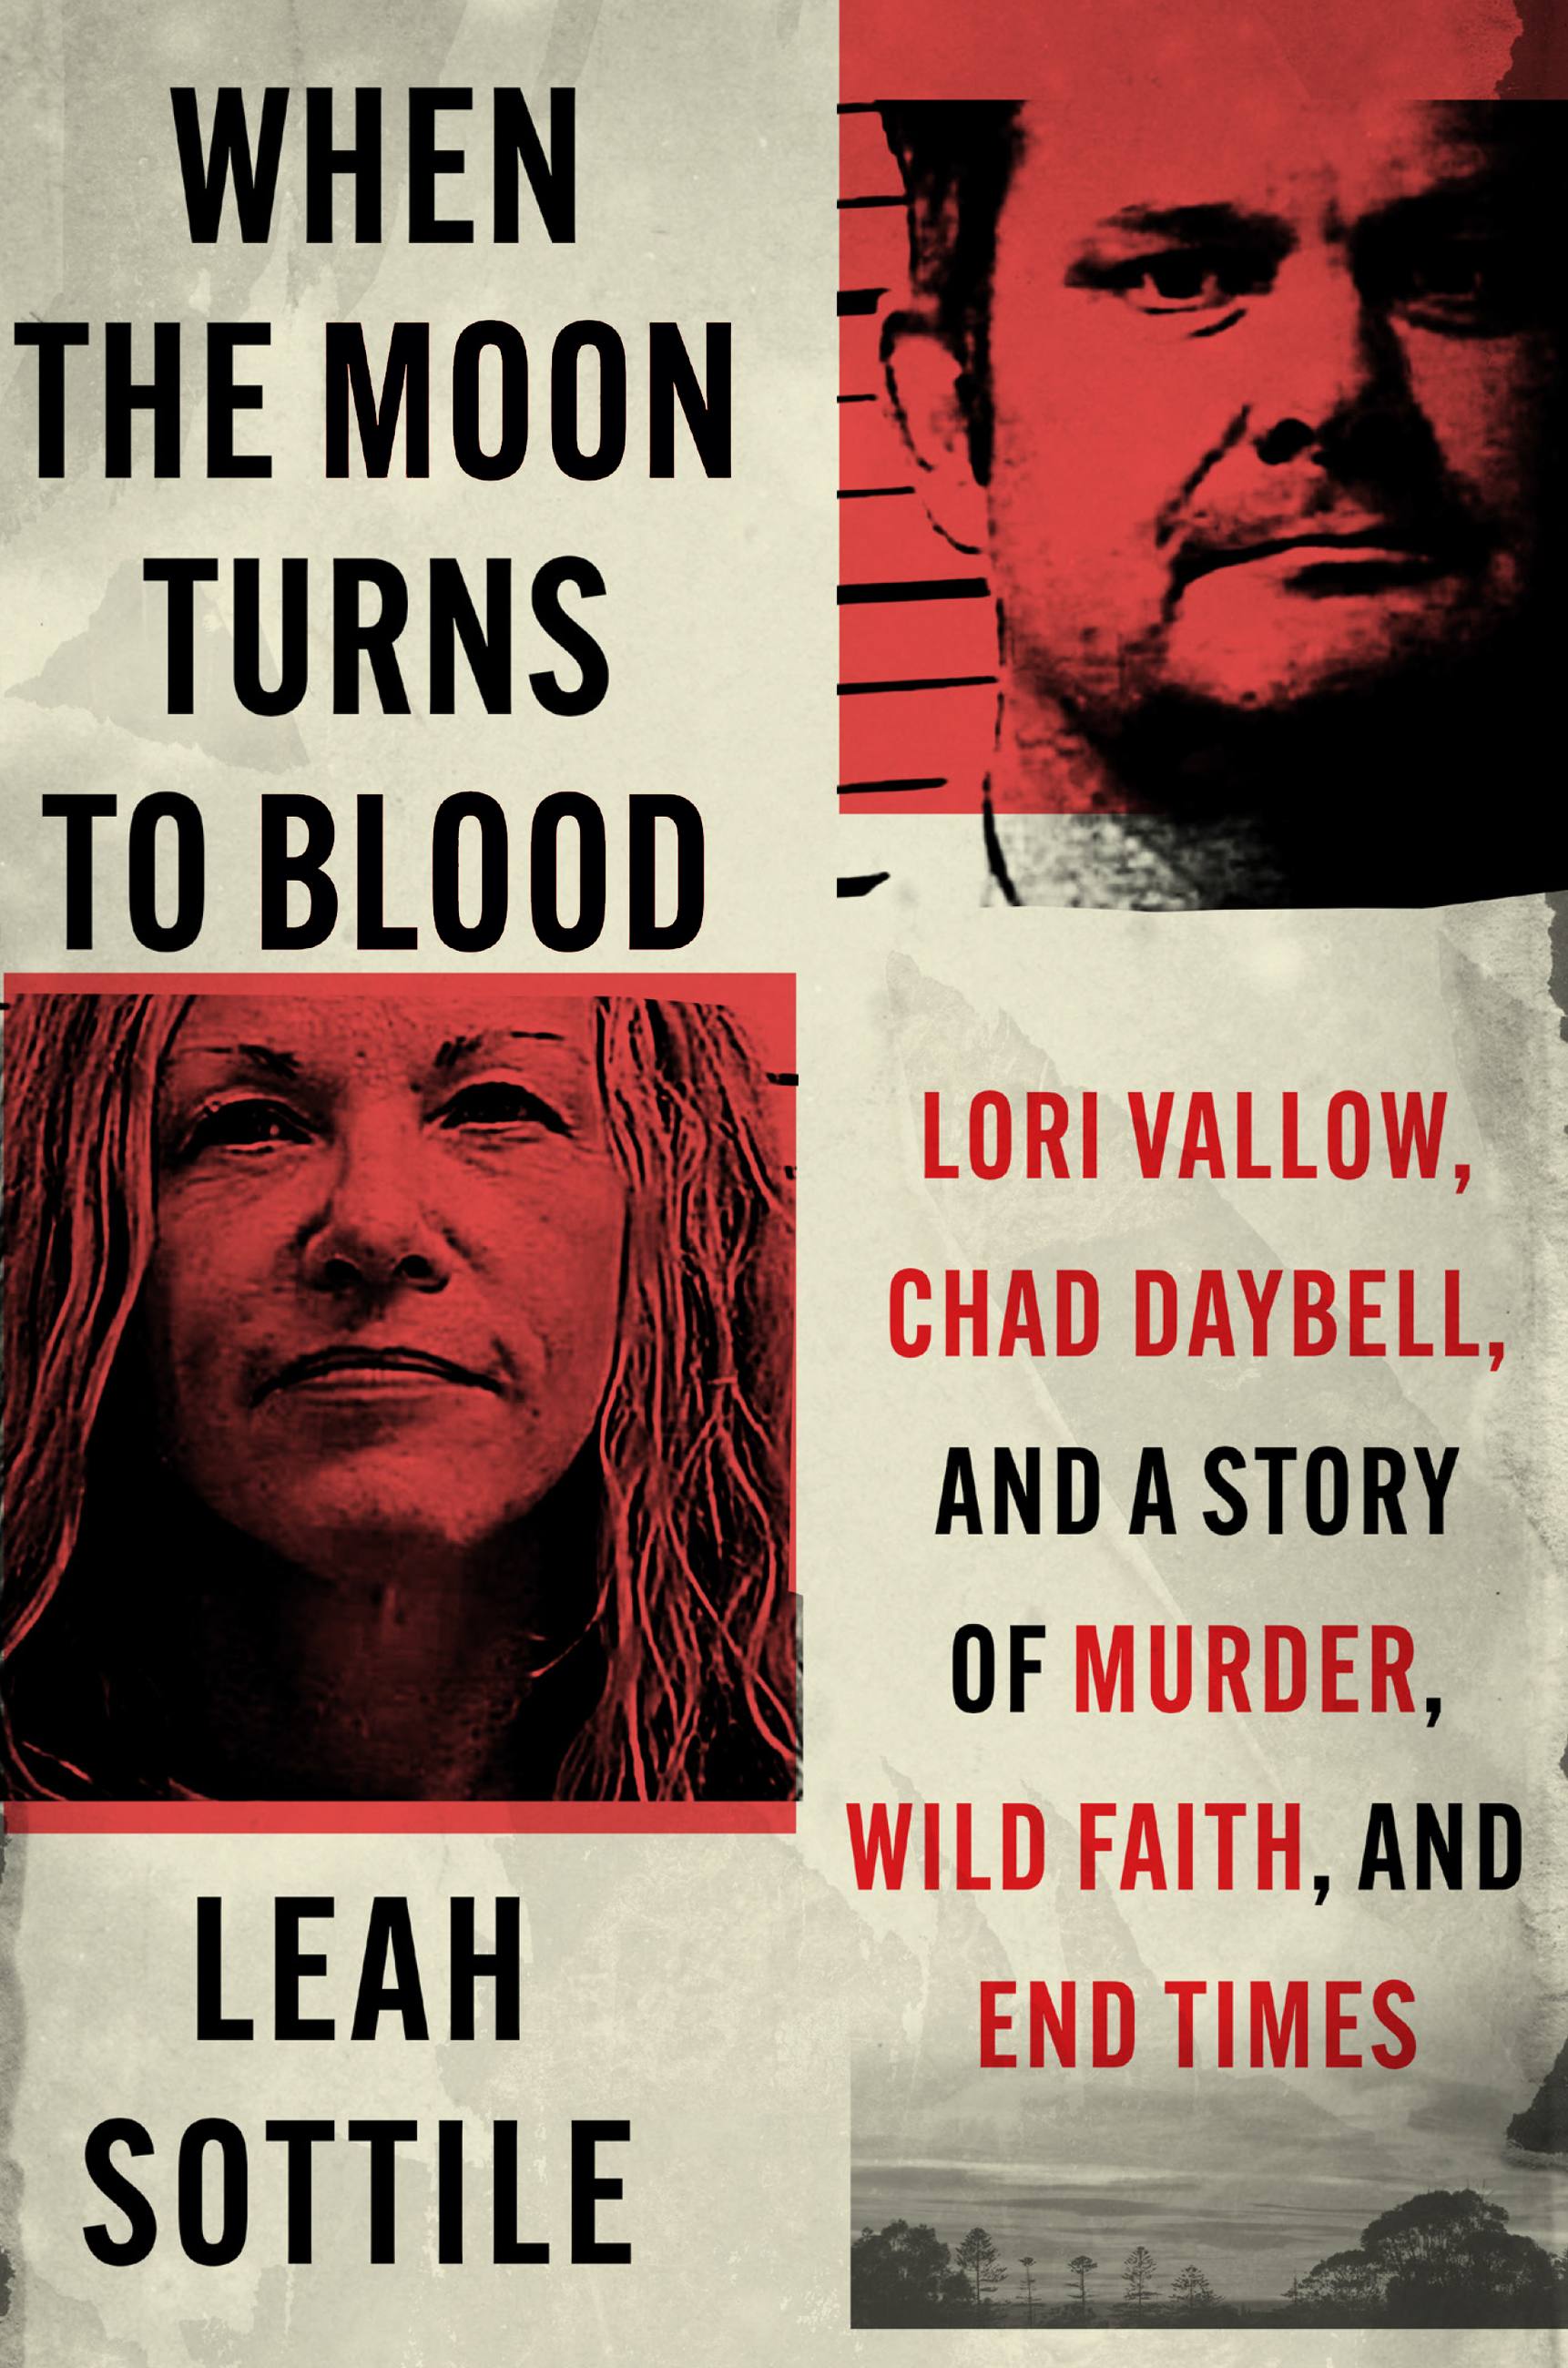 When the Moon Turns to Blood Lori Vallow, Chad Daybell, and a Story of Murder, Wild Faith, and End Times